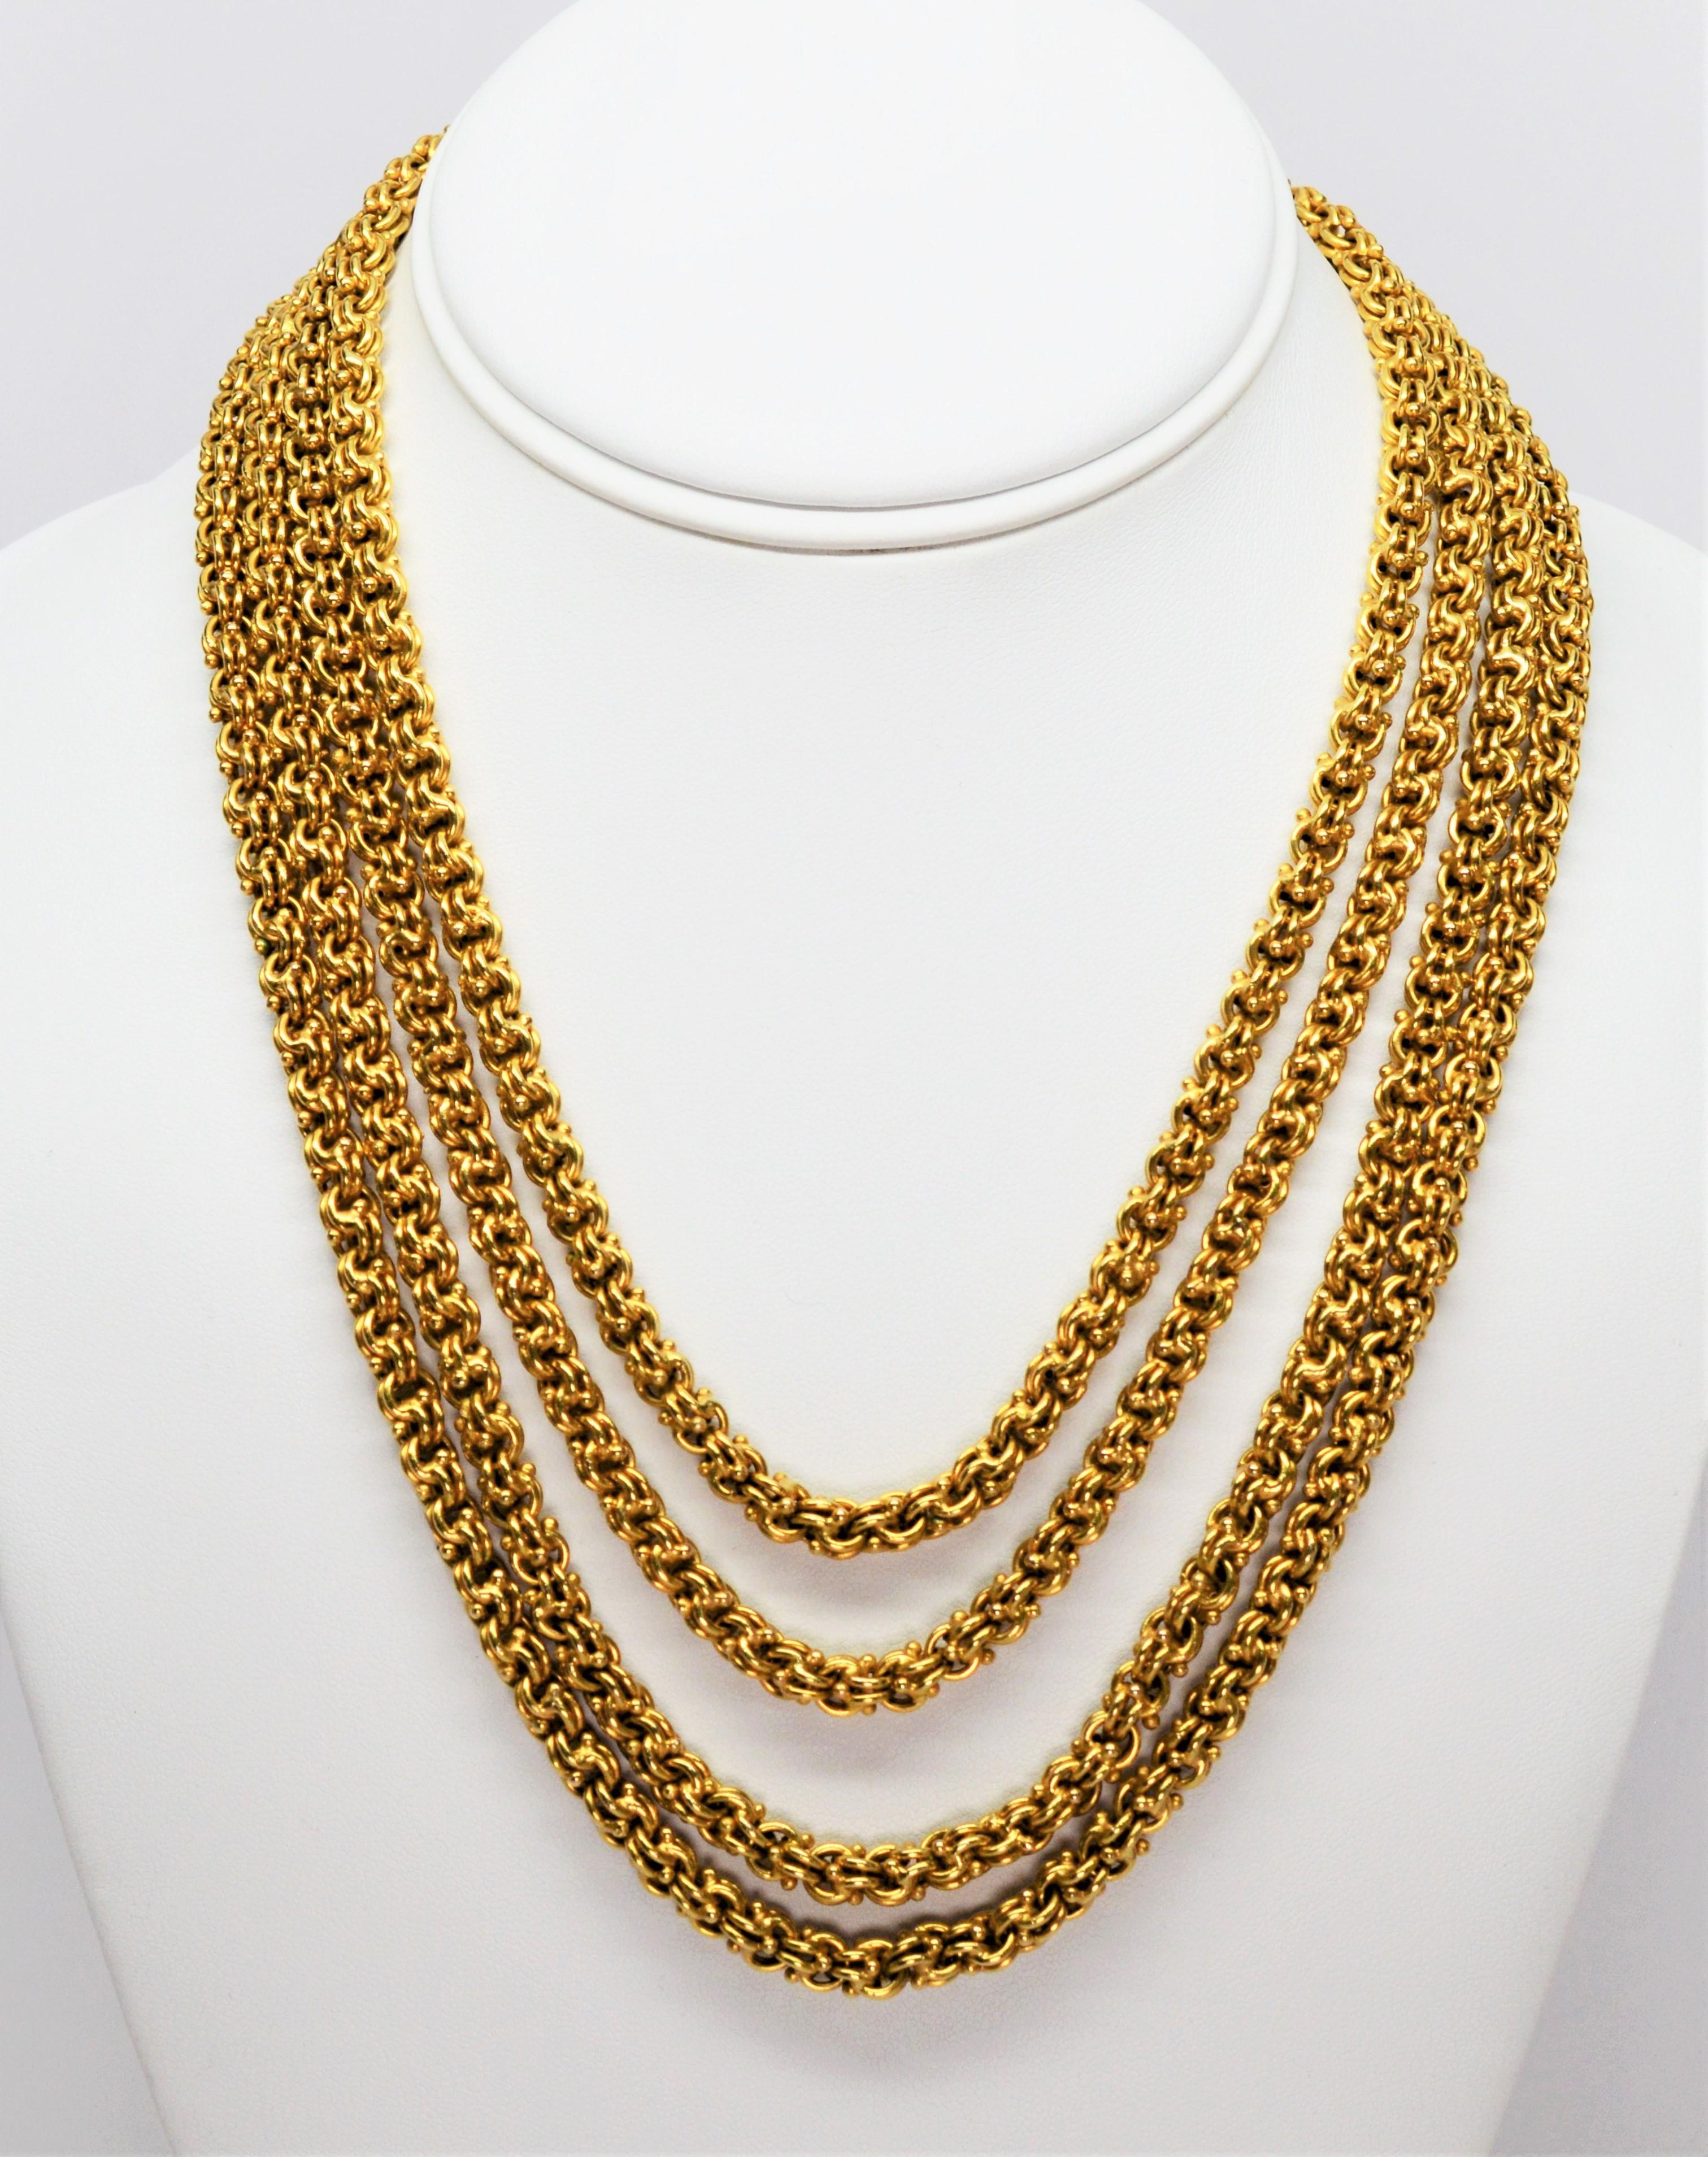 Women's Antique Handmade Long Yellow Gold Double Cable Chain For Sale